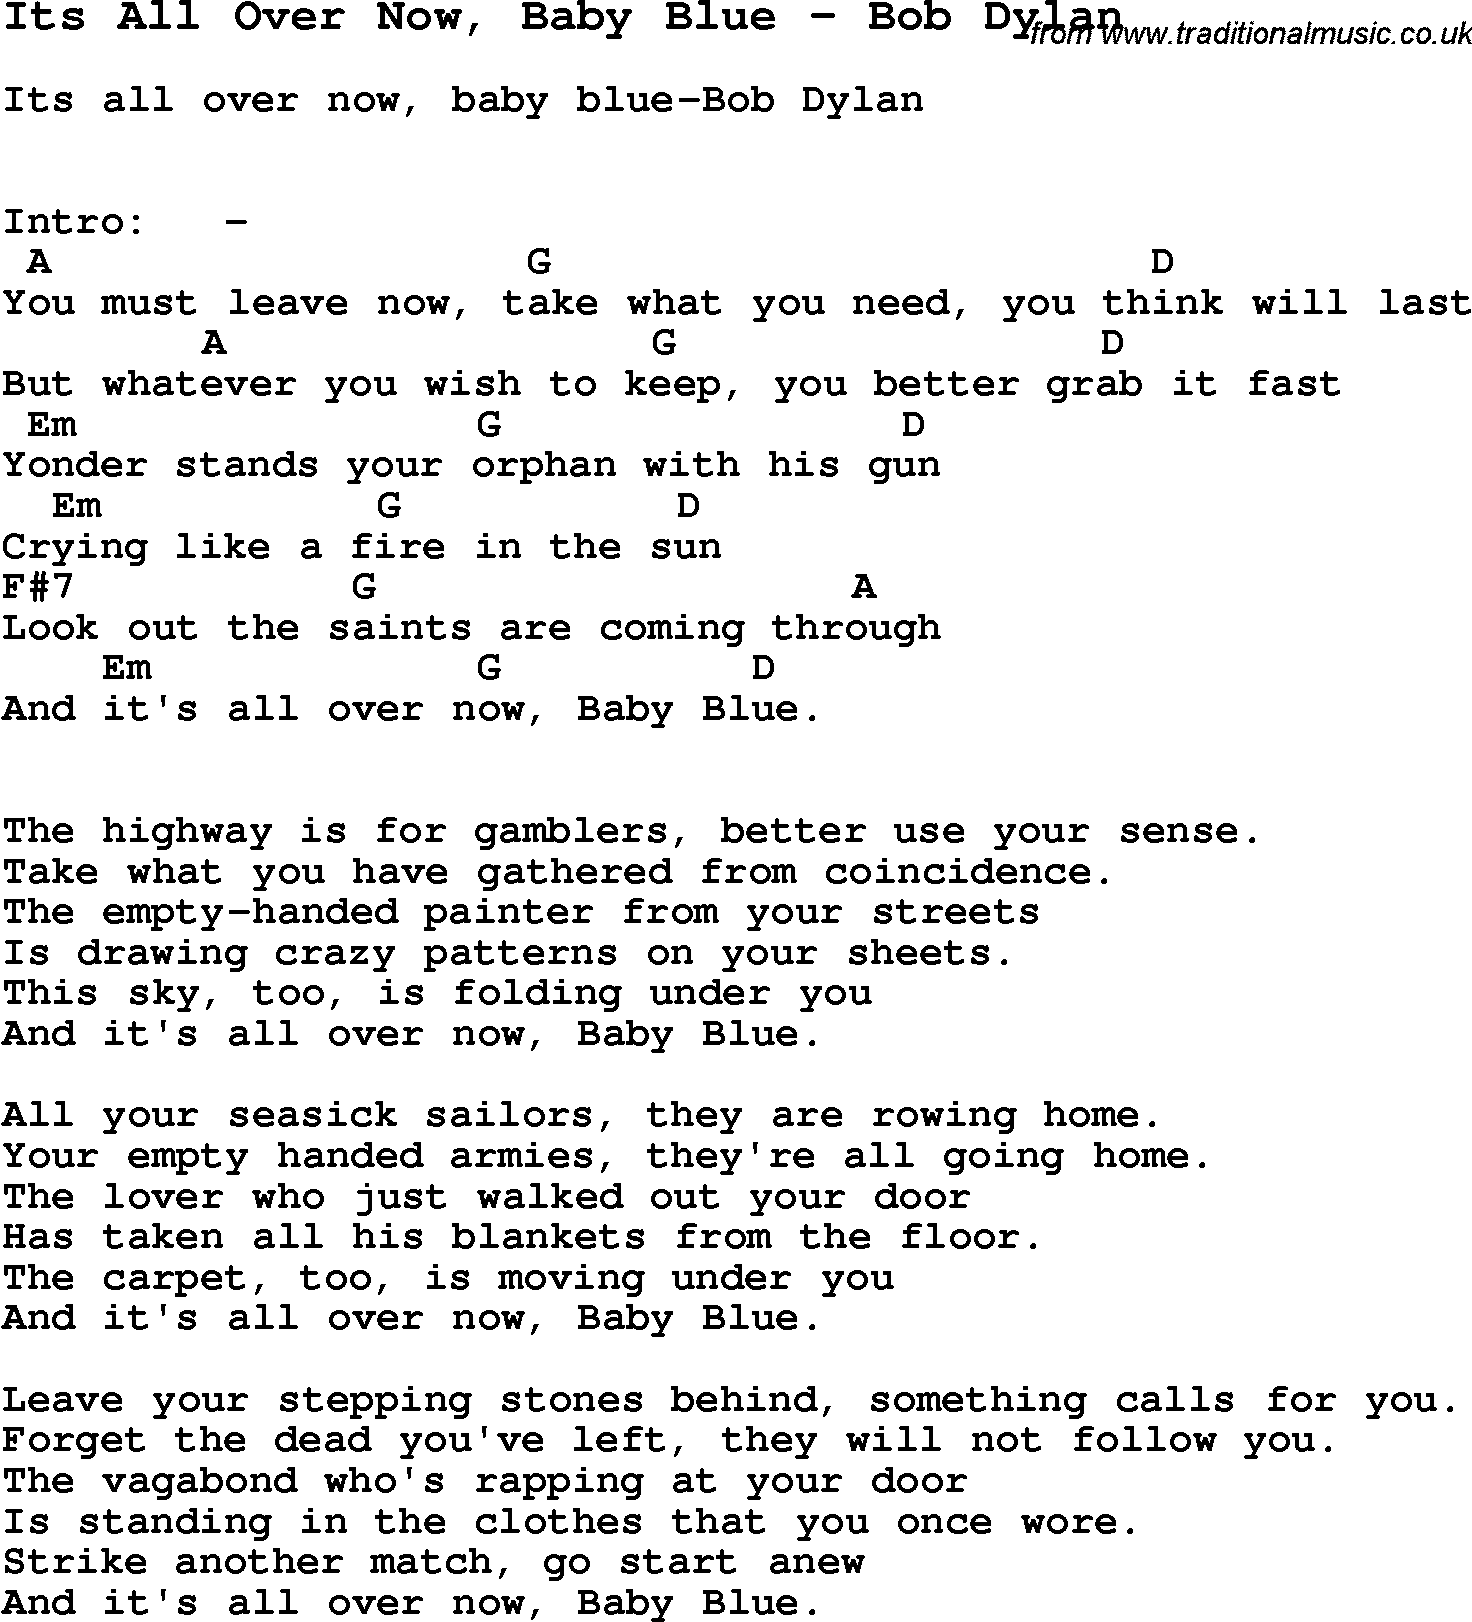 Song Its All Over Now, Baby Blue by Bob Dylan, with lyrics for vocal performance and accompaniment chords for Ukulele, Guitar Banjo etc.